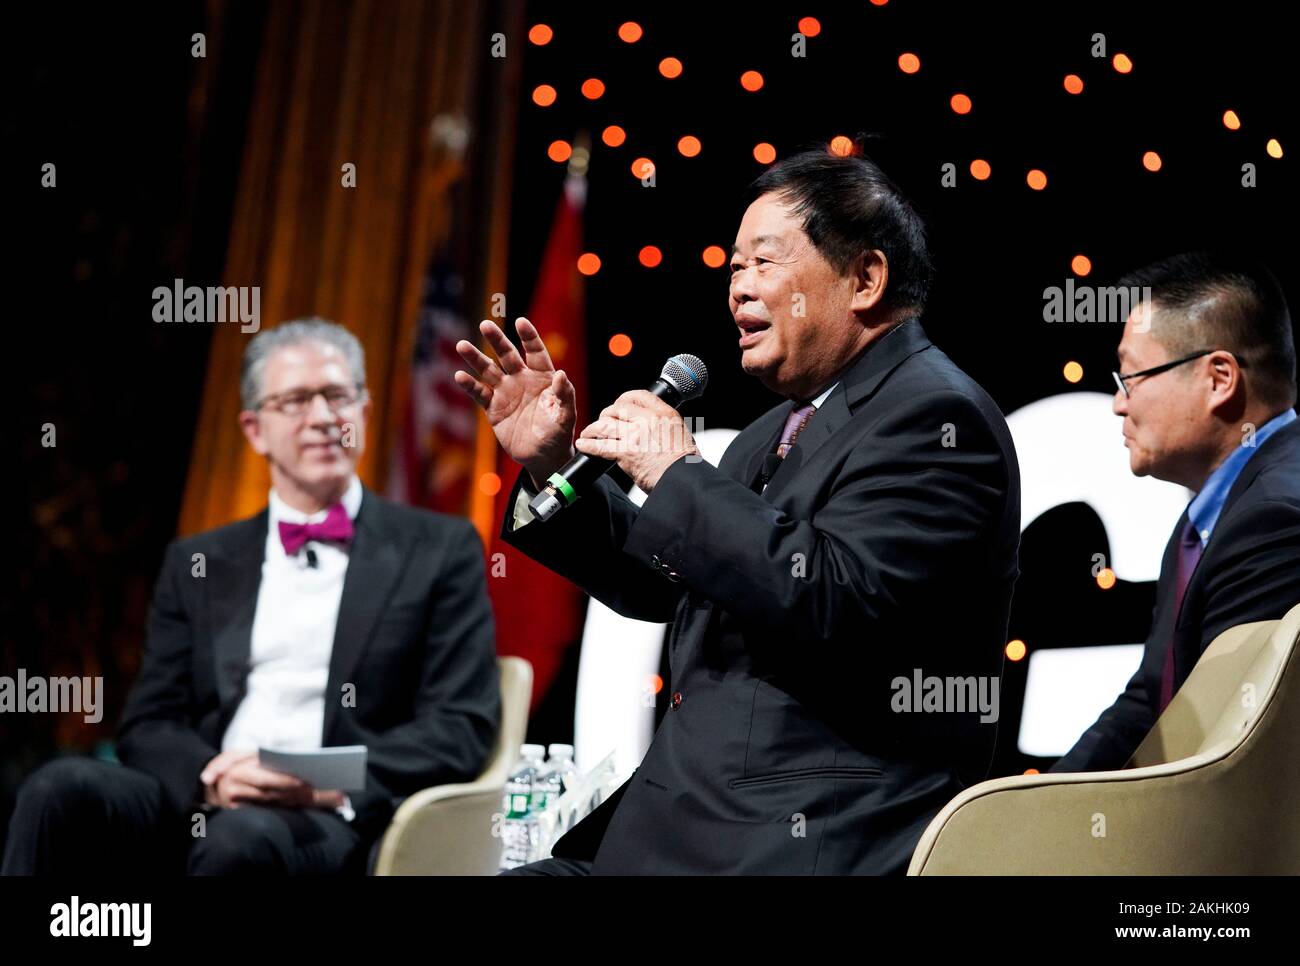 New York, USA. 8th Jan, 2020. Cao Dewang (C), chairman and founder of Chinese Fuyao Group, attends a fireside chat during the 15th anniversary and Chinese Lunar New Year gala of China General Chamber of Commerce-U.S.A. in New York, the United States, Jan. 8, 2020. Credit: Wang Ying/Xinhua/Alamy Live News Stock Photo